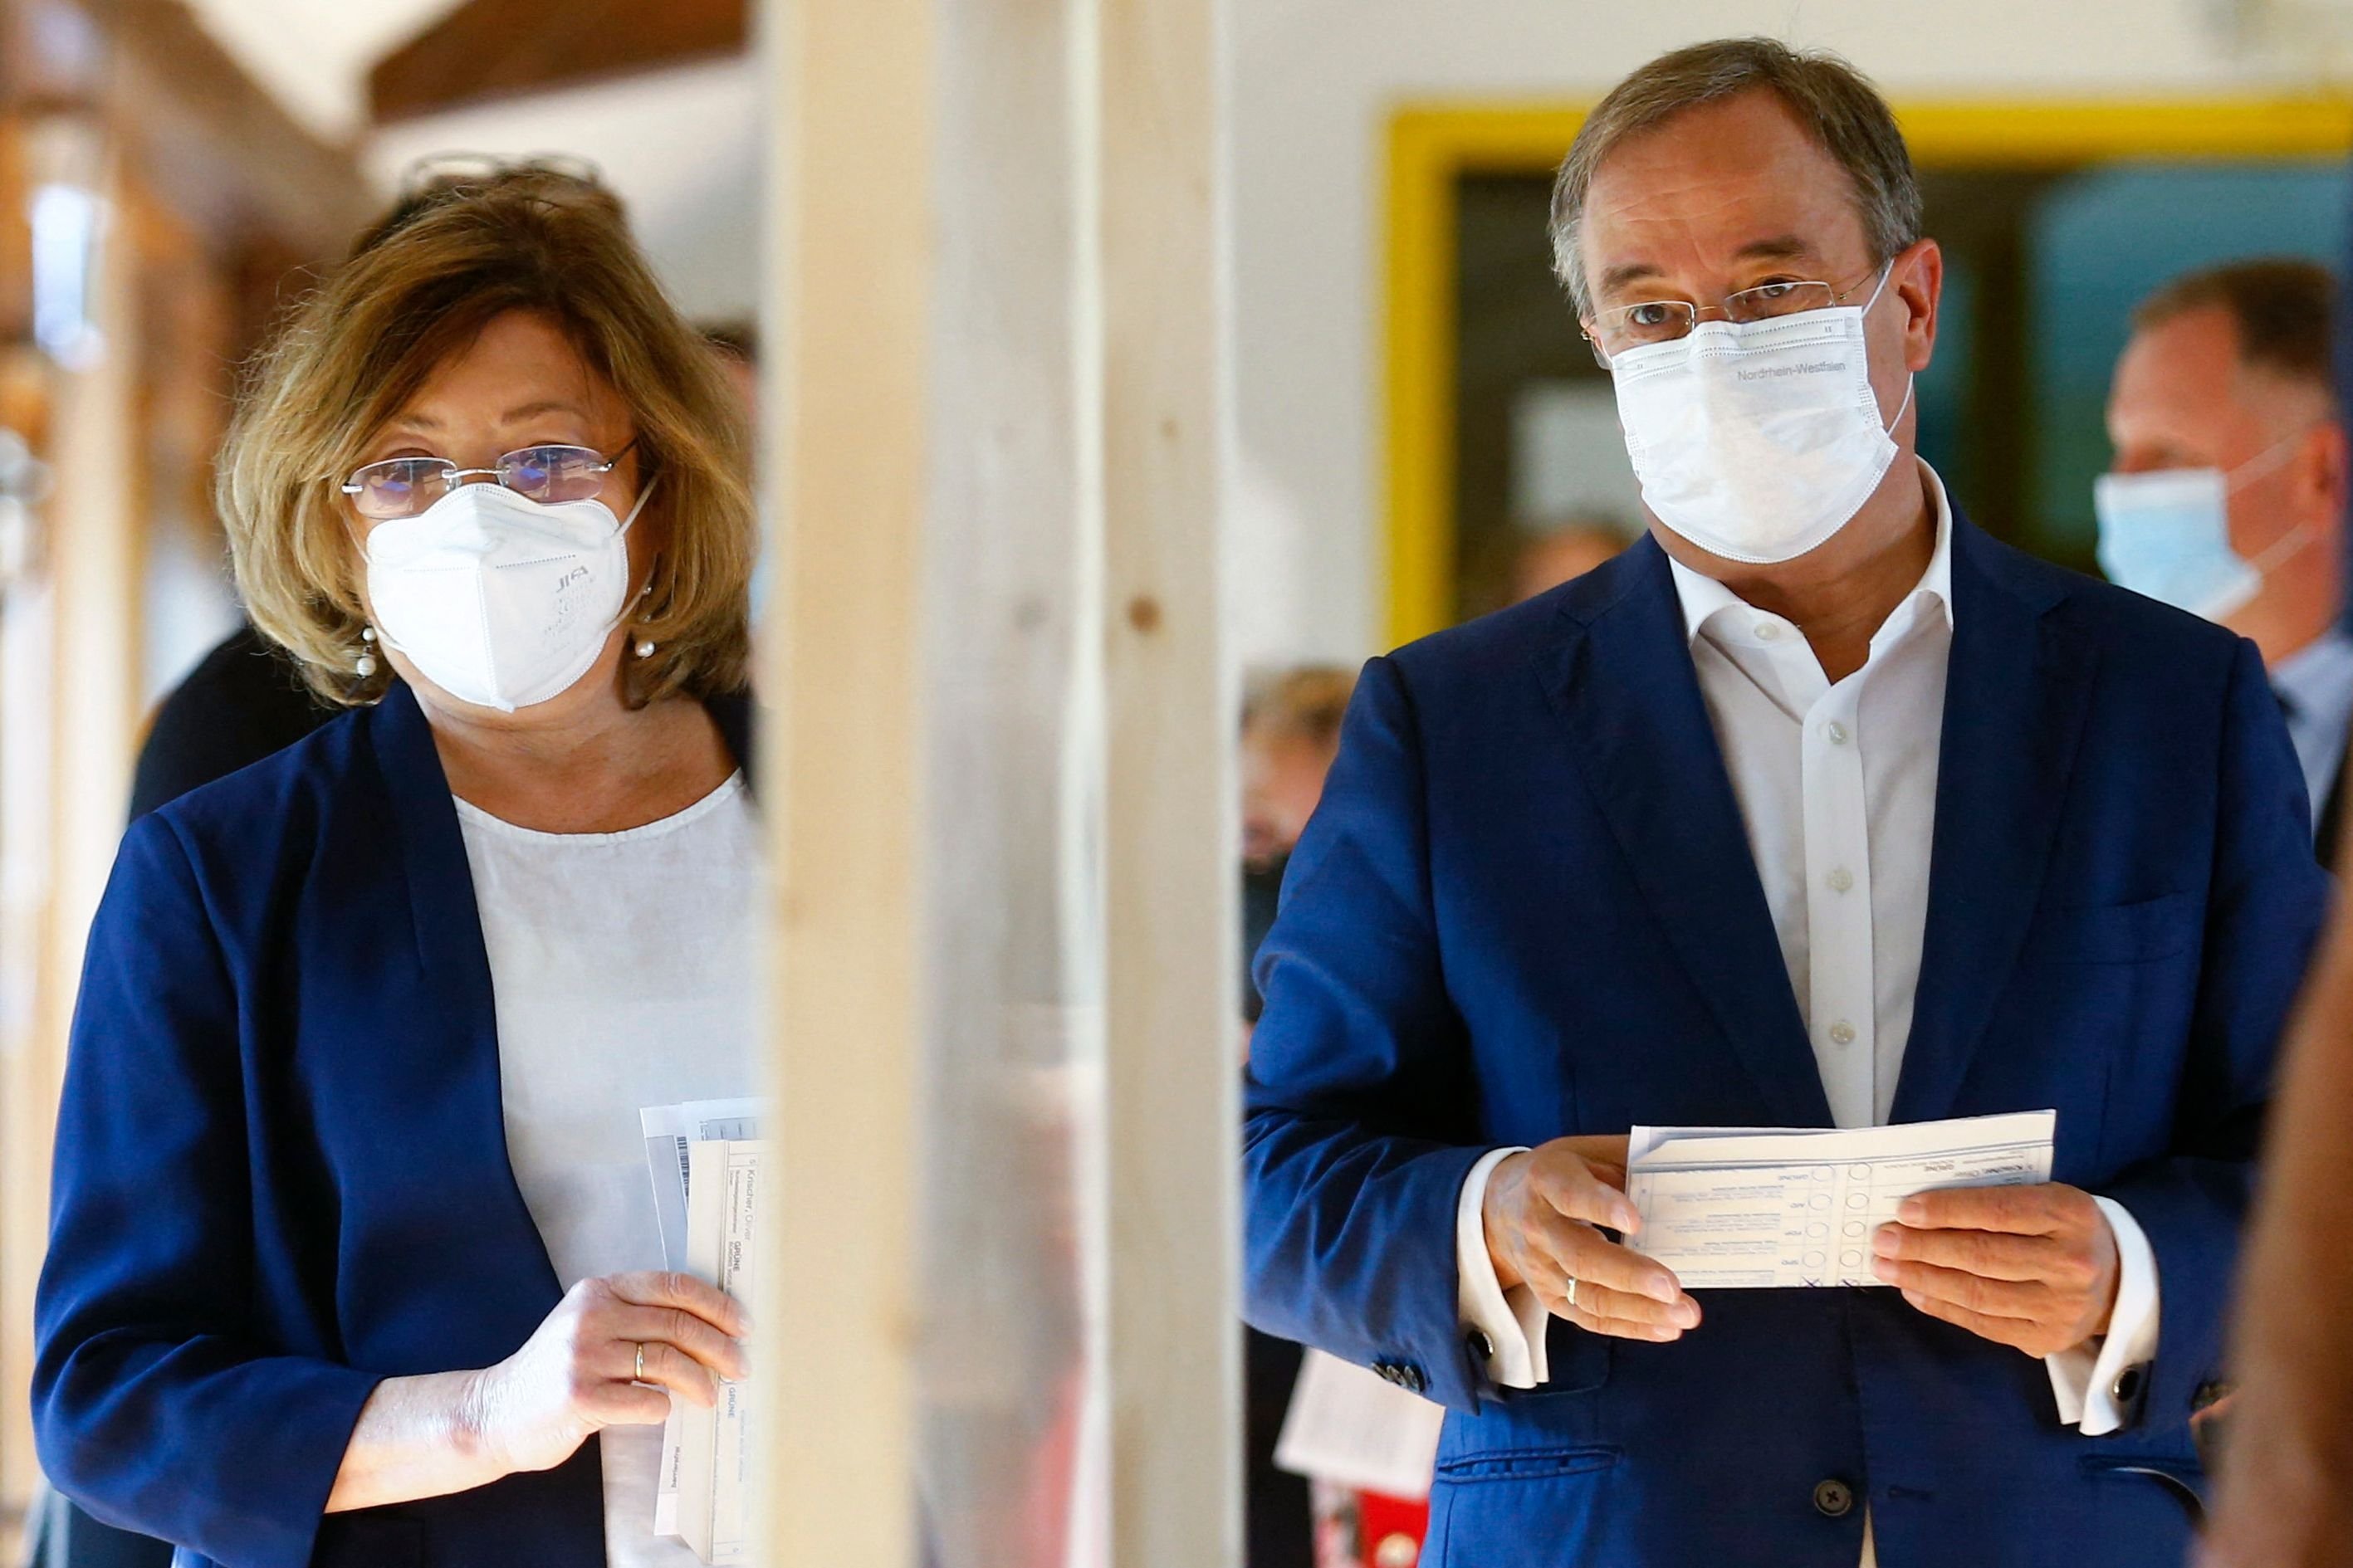 Germany's conservative Christian Democratic Union CDU leader and candidate for chancellor Armin Laschet and his wife Susanne Laschet arrive to cast their ballots at a polling station in Aachen, western Germany, during general elections on September 26, 2021. (AFP Photo)